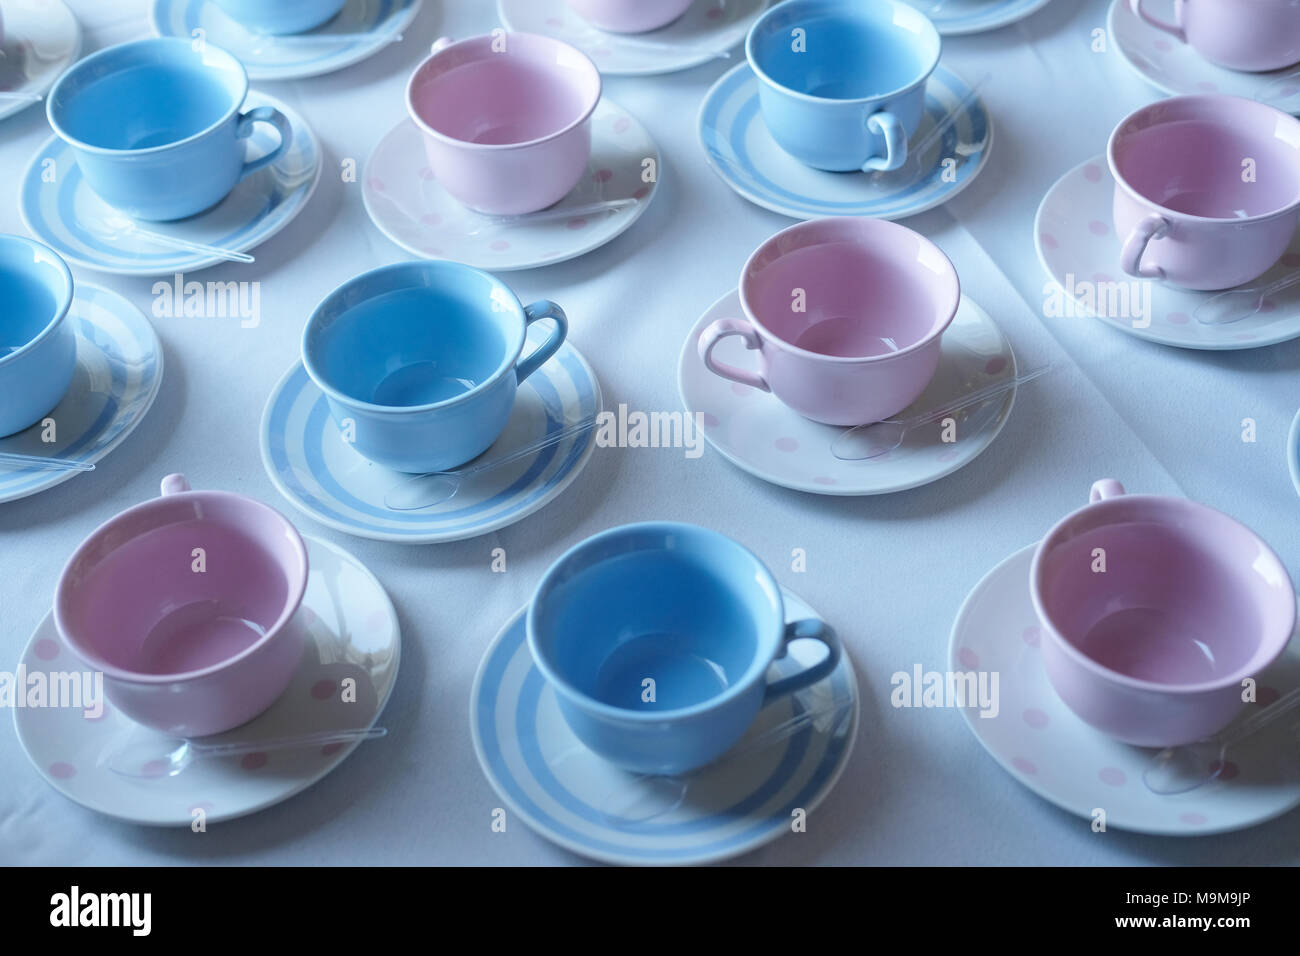 Empty pink and blue cups on a table. Stock Photo